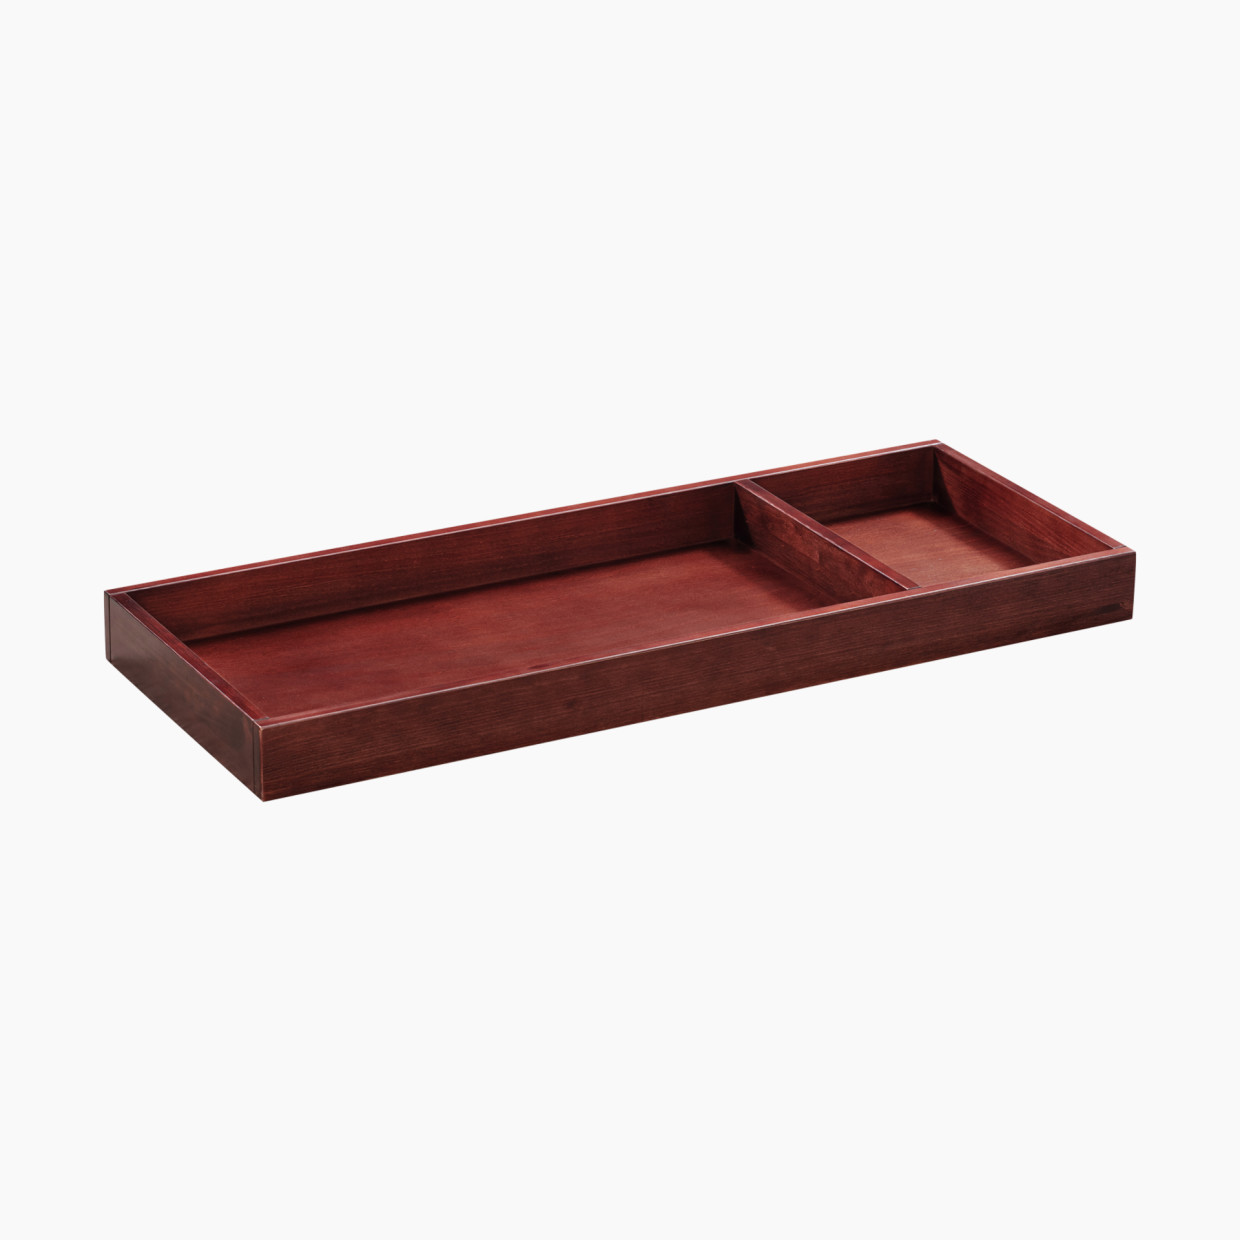 DaVinci Universal Wide Removable Changing Tray - Rich Cherry.